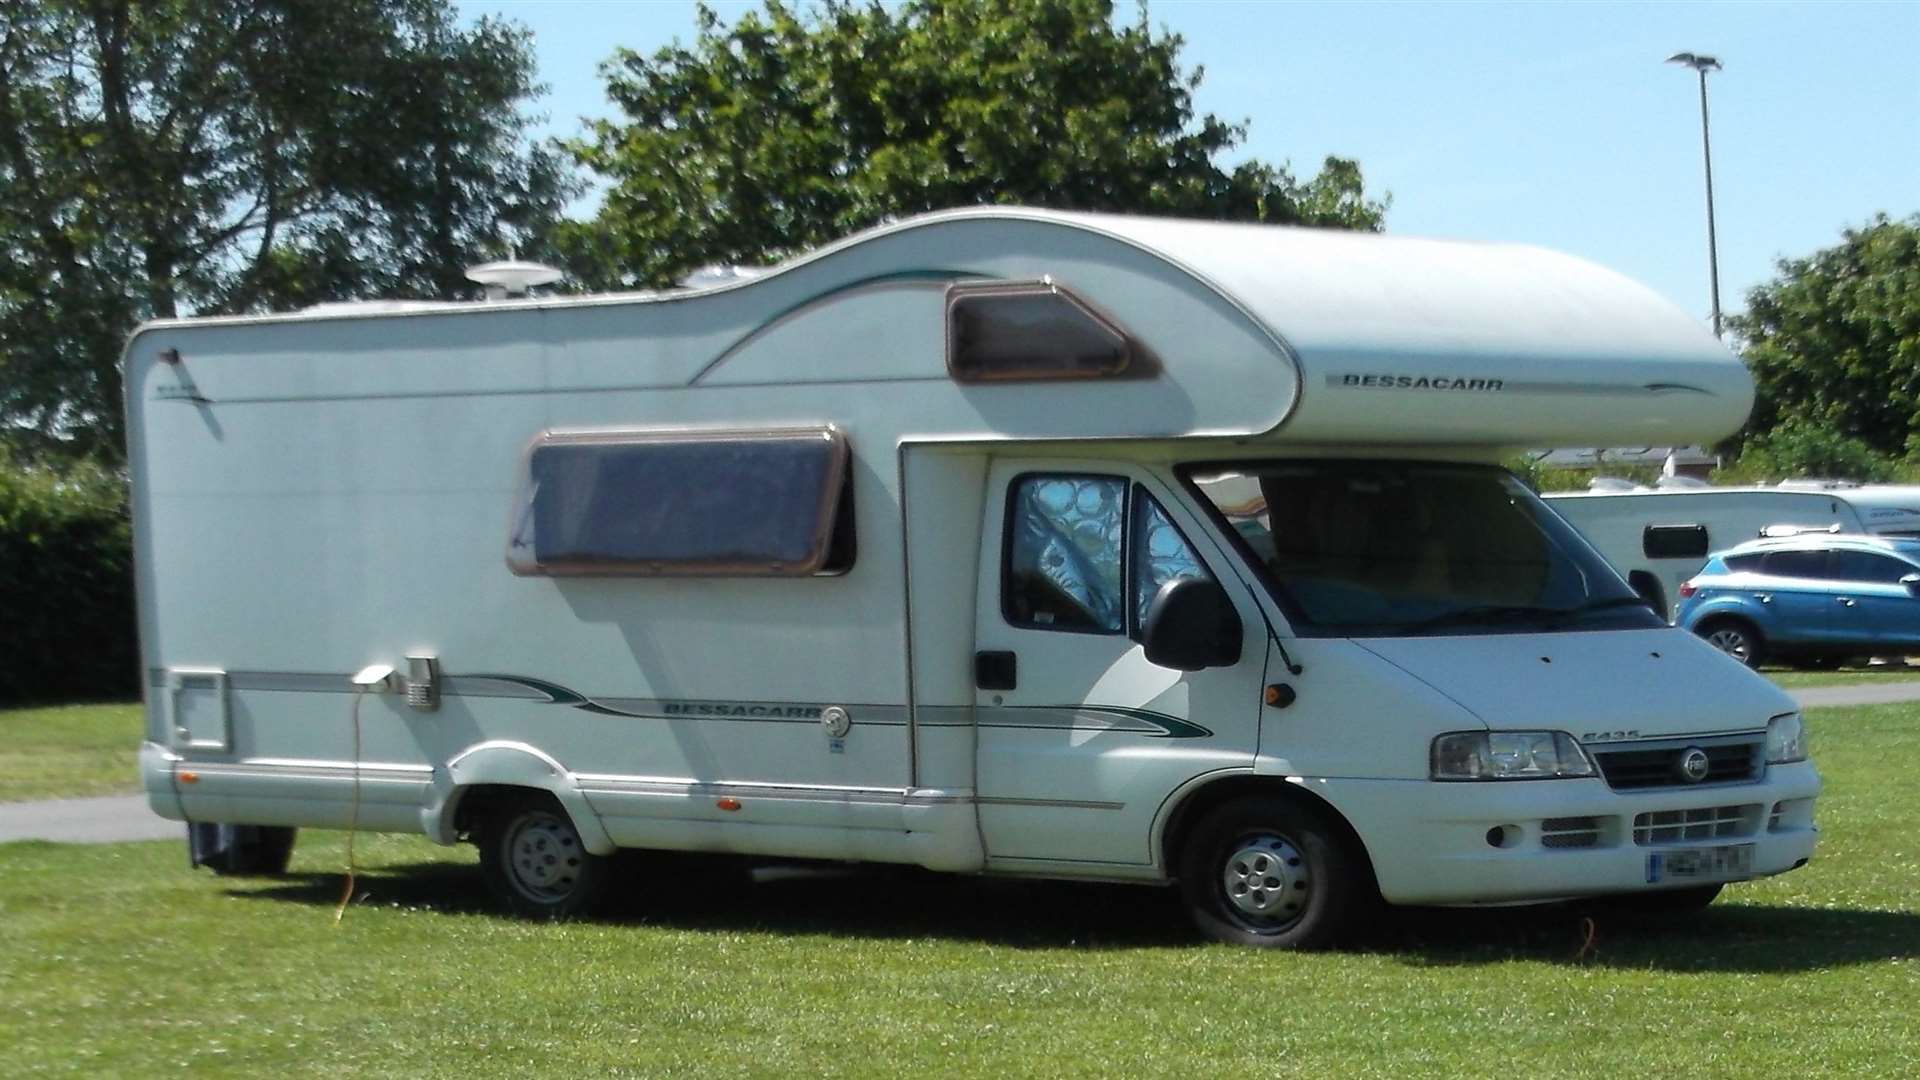 The family's motorhome was stolen from the driveway in Sittingbourne